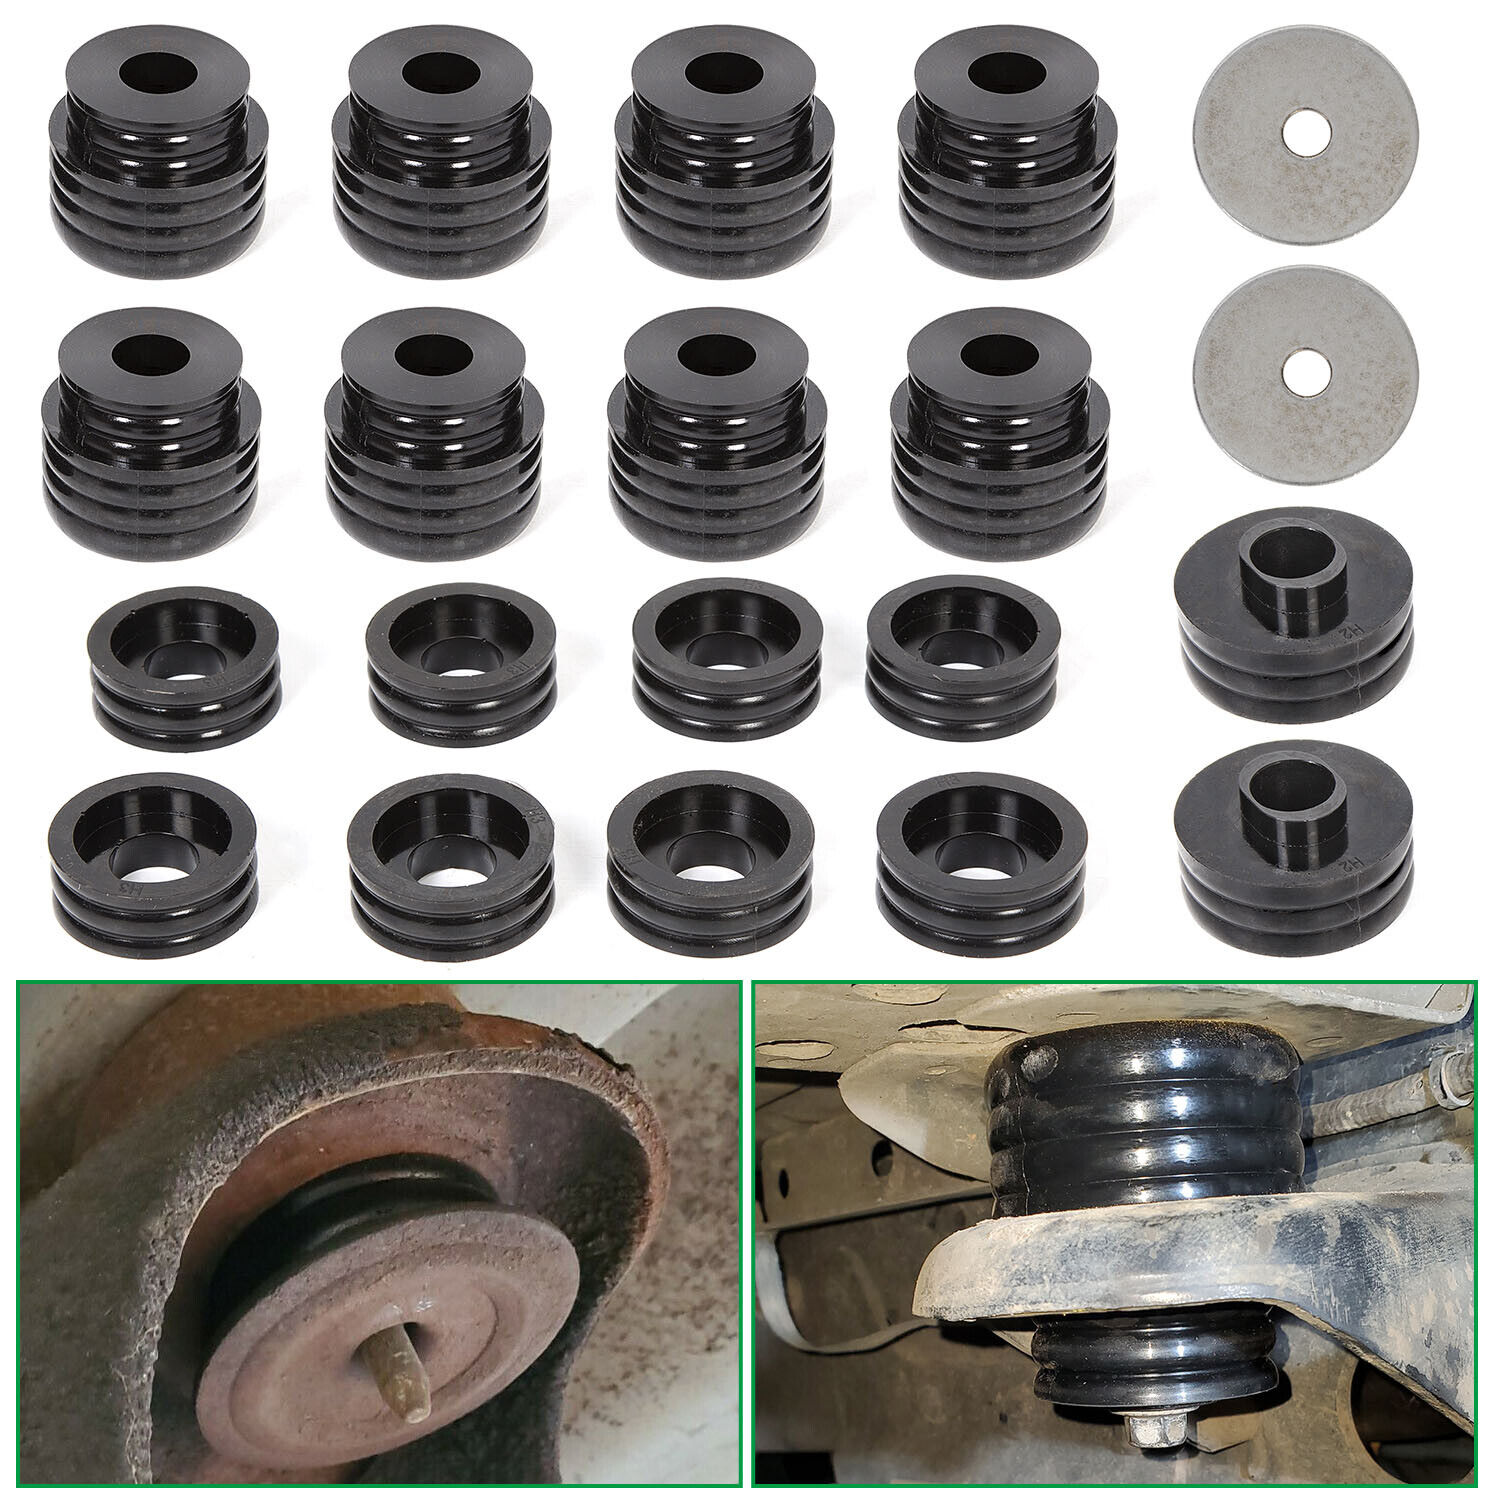 Replacement Body Cab Mount Bushings Kit For 1999-17 Ford F250 F350 Super Duty